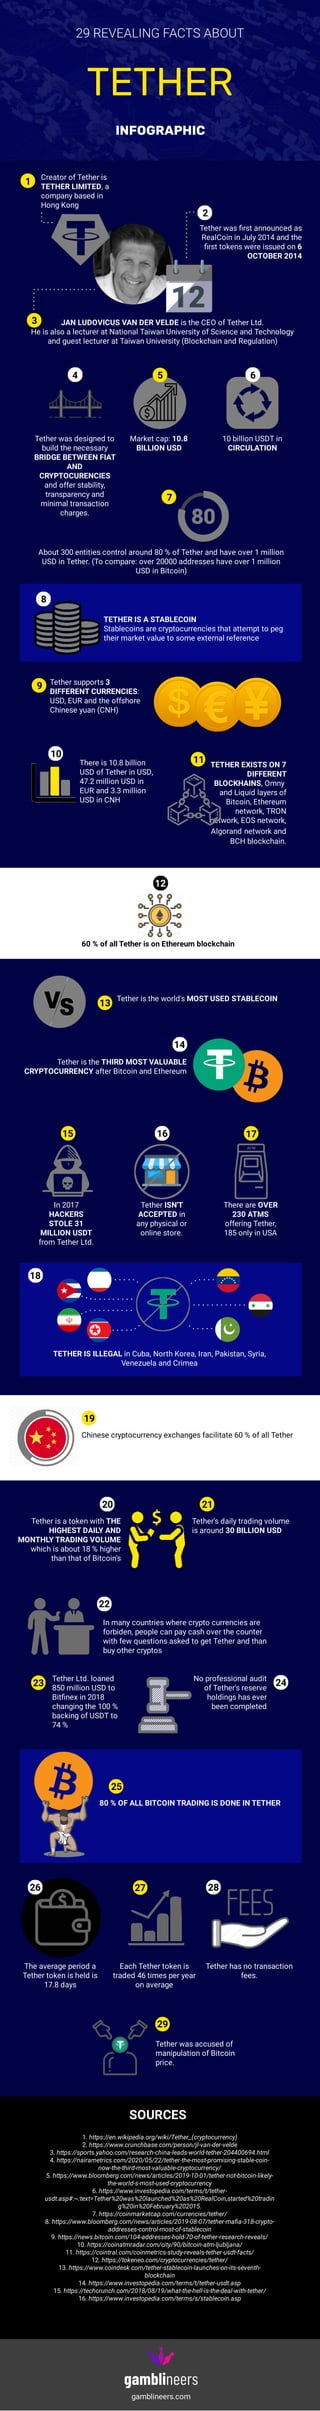 gamblineers.com
1. https://en.wikipedia.org/wiki/Tether_(cryptocurrency)
2. https://www.crunchbase.com/person/jl-van-der-velde
3. https://sports.yahoo.com/research-china-leads-world-tether-204400694.html
4. https://nairametrics.com/2020/05/22/tether-the-most-promising-stable-coin-
now-the-third-most-valuable-cryptocurrency/
5. https://www.bloomberg.com/news/articles/2019-10-01/tether-not-bitcoin-likely-
the-world-s-most-used-cryptocurrency
6. https://www.investopedia.com/terms/t/tether-
usdt.asp#:~:text=Tether%20was%20launched%20as%20RealCoin,started%20tradin
g%20in%20February%202015.
7. https://coinmarketcap.com/currencies/tether/
8. https://www.bloomberg.com/news/articles/2019-08-07/tether-mafia-318-crypto-
addresses-control-most-of-stablecoin
9. https://news.bitcoin.com/104-addresses-hold-70-of-tether-research-reveals/
10. https://coinatmradar.com/city/90/bitcoin-atm-ljubljana/
11. https://cointral.com/coinmetrics-study-reveals-tether-usdt-facts/
12. https://tokeneo.com/cryptocurrencies/tether/
13. https://www.coindesk.com/tether-stablecoin-launches-on-its-seventh-
blockchain
14. https://www.investopedia.com/terms/t/tether-usdt.asp
15. https://techcrunch.com/2018/08/19/what-the-hell-is-the-deal-with-tether/
16. https://www.investopedia.com/terms/s/stablecoin.asp
SOURCES
Tether was accused of
manipulation of Bitcoin
price.
29
Tether has no transaction
fees.
28
Each Tether token is
traded 46 times per year
on average
27
The average period a
Tether token is held is
17.8 days
26
80 % OF ALL BITCOIN TRADING IS DONE IN TETHER
25
No professional audit
of Tether's reserve
holdings has ever
been completed
24
Tether Ltd. loaned
850 million USD to
Bitfinex in 2018
changing the 100 %
backing of USDT to
74 %
23
In many countries where crypto currencies are
forbiden, people can pay cash over the counter
with few questions asked to get Tether and than
buy other cryptos
22
Tether's daily trading volume
is around 30 BILLION USD
21
Tether is a token with THE
HIGHEST DAILY AND
MONTHLY TRADING VOLUME
which is about 18 % higher
than that of Bitcoin's
20
Chinese cryptocurrency exchanges facilitate 60 % of all Tether
19
TETHER IS ILLEGAL in Cuba, North Korea, Iran, Pakistan, Syria,
Venezuela and Crimea
18
There are OVER
230 ATMS
offering Tether,
185 only in USA
17
Tether ISN'T
ACCEPTED in
any physical or
online store.
16
In 2017
HACKERS
STOLE 31
MILLION USDT
from Tether Ltd.
15
Tether is the THIRD MOST VALUABLE
CRYPTOCURRENCY after Bitcoin and Ethereum
14
Tether is the world's MOST USED STABLECOIN
13
60 % of all Tether is on Ethereum blockchain
12
TETHER EXISTS ON 7
DIFFERENT
BLOCKHAINS, Omny
and Liquid layers of
Bitcoin, Ethereum
network, TRON
network, EOS network,
Algorand network and
BCH blockchain.
11There is 10.8 billion
USD of Tether in USD,
47.2 million USD in
EUR and 3.3 million
USD in CNH
10
9 Tether supports 3
DIFFERENT CURRENCIES:
USD, EUR and the offshore
Chinese yuan (CNH)
TETHER IS A STABLECOIN
Stablecoins are cryptocurrencies that attempt to peg
their market value to some external reference
8
About 300 entities control around 80 % of Tether and have over 1 million
USD in Tether. (To compare: over 20000 addresses have over 1 million
USD in Bitcoin)
7
10 billion USDT in
CIRCULATION
6
Market cap: 10.8
BILLION USD
5
Tether was designed to
build the necessary
BRIDGE BETWEEN FIAT
AND
CRYPTOCURENCIES
and offer stability,
transparency and
minimal transaction
charges.
4
JAN LUDOVICUS VAN DER VELDE is the CEO of Tether Ltd.
He is also a lecturer at National Taiwan University of Science and Technology
and guest lecturer at Taiwan University (Blockchain and Regulation)
3
2
Tether was first announced as
RealCoin in July 2014 and the
first tokens were issued on 6
OCTOBER 2014
Creator of Tether is
TETHER LIMITED, a
company based in
Hong Kong
1
TETHER
INFOGRAPHIC
29 REVEALING FACTS ABOUT
 